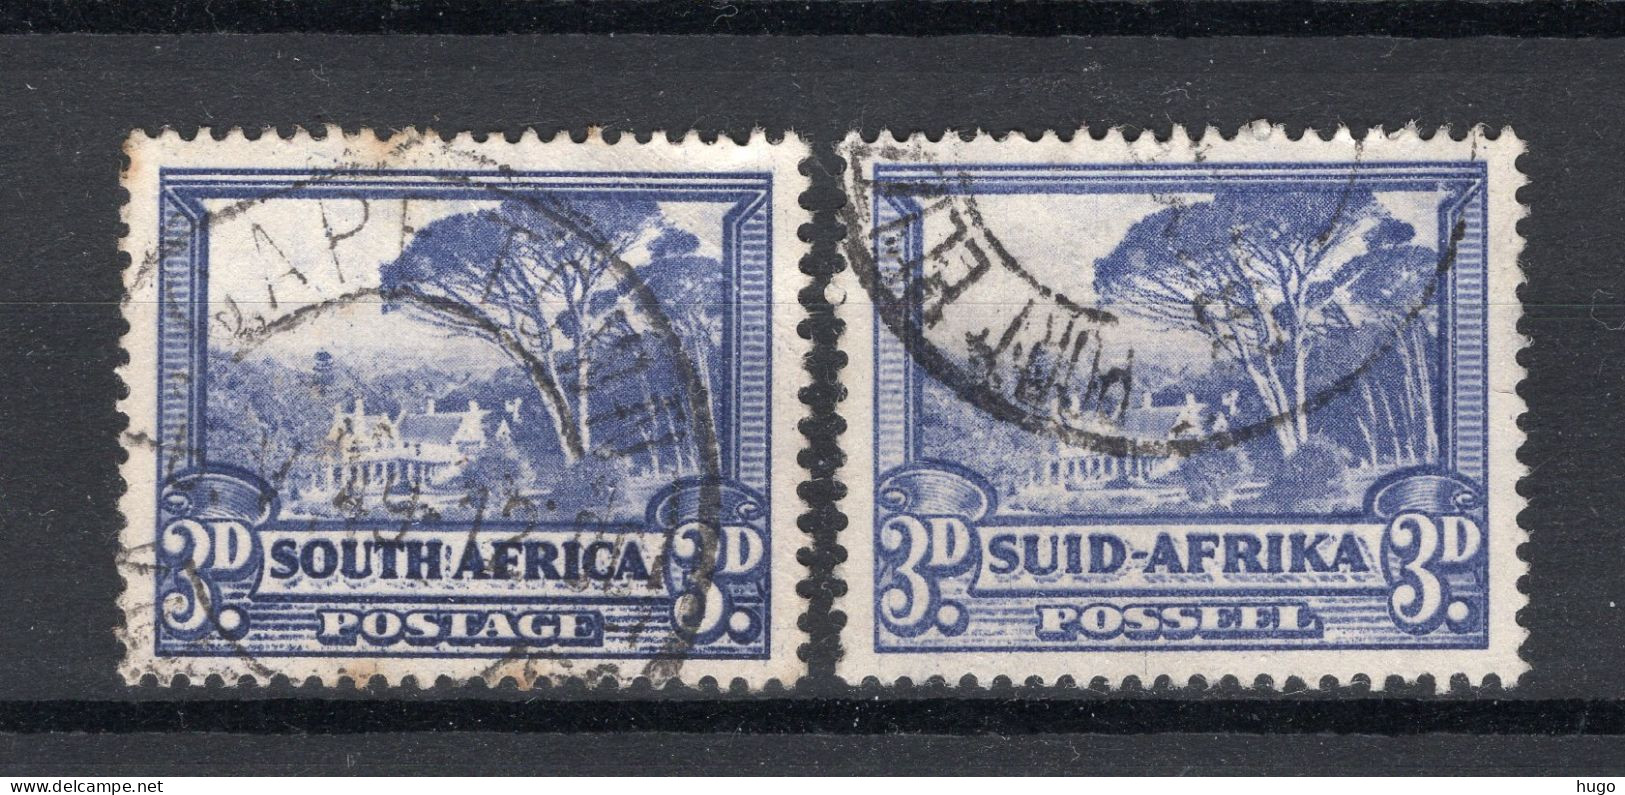 ZUID AFRIKA Yt. 113A/114A° Gestempeld 1939-1940 - Used Stamps